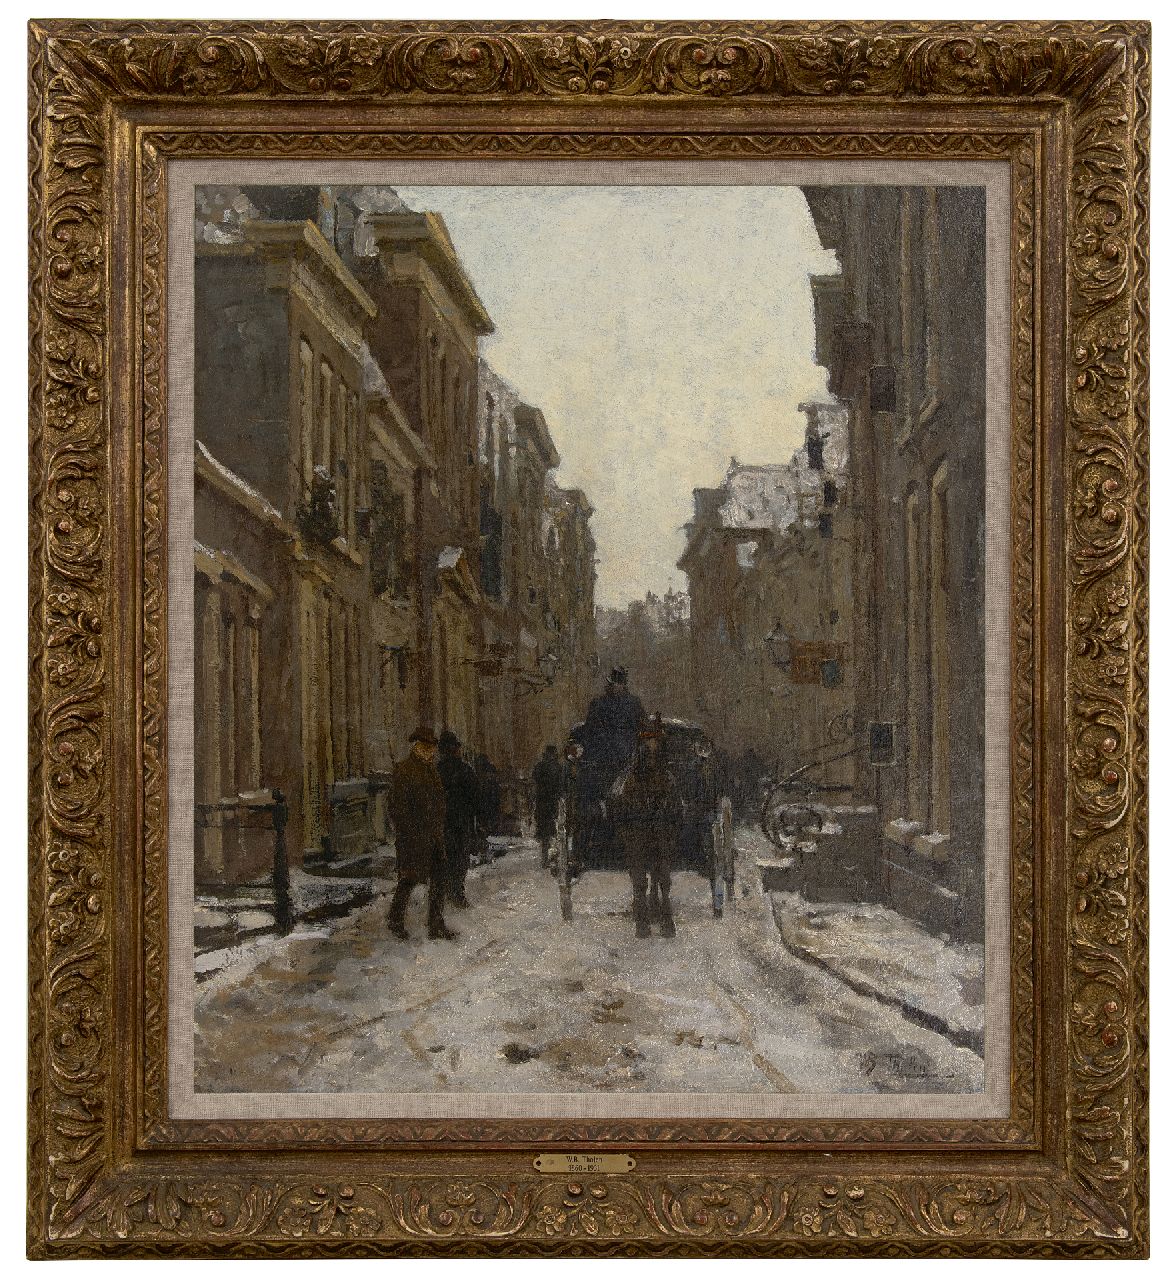 Tholen W.B.  | Willem Bastiaan Tholen | Paintings offered for sale | Carriage in a snowy street in Voorburg, oil on canvas laid down on panel 64.1 x 56.3 cm, signed l.r. and executed ca. 1889